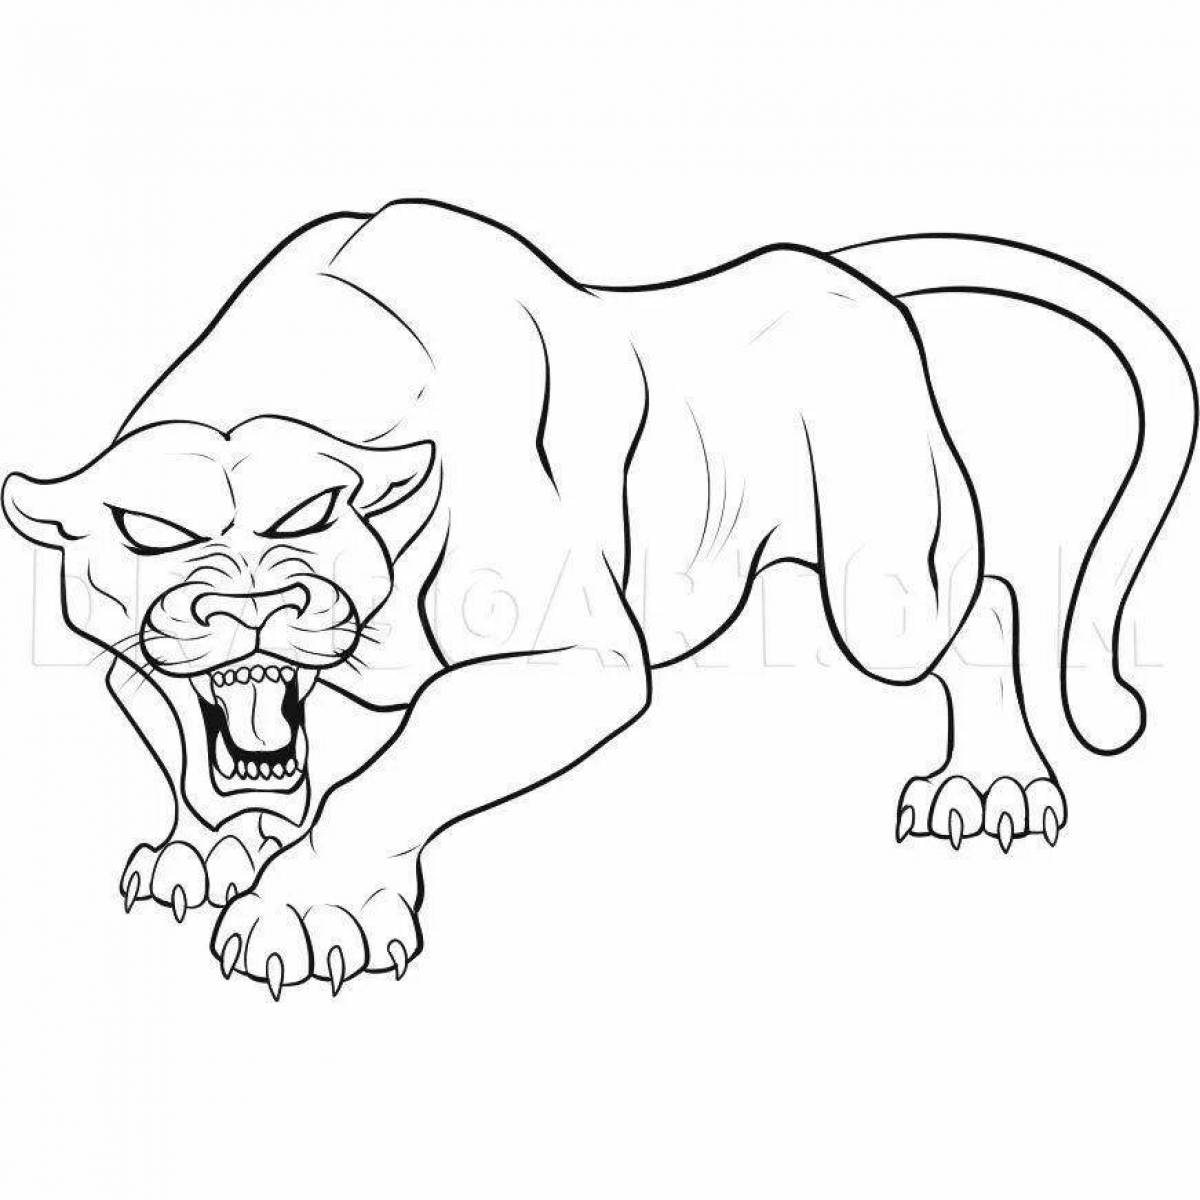 Gorgeous black panther coloring page